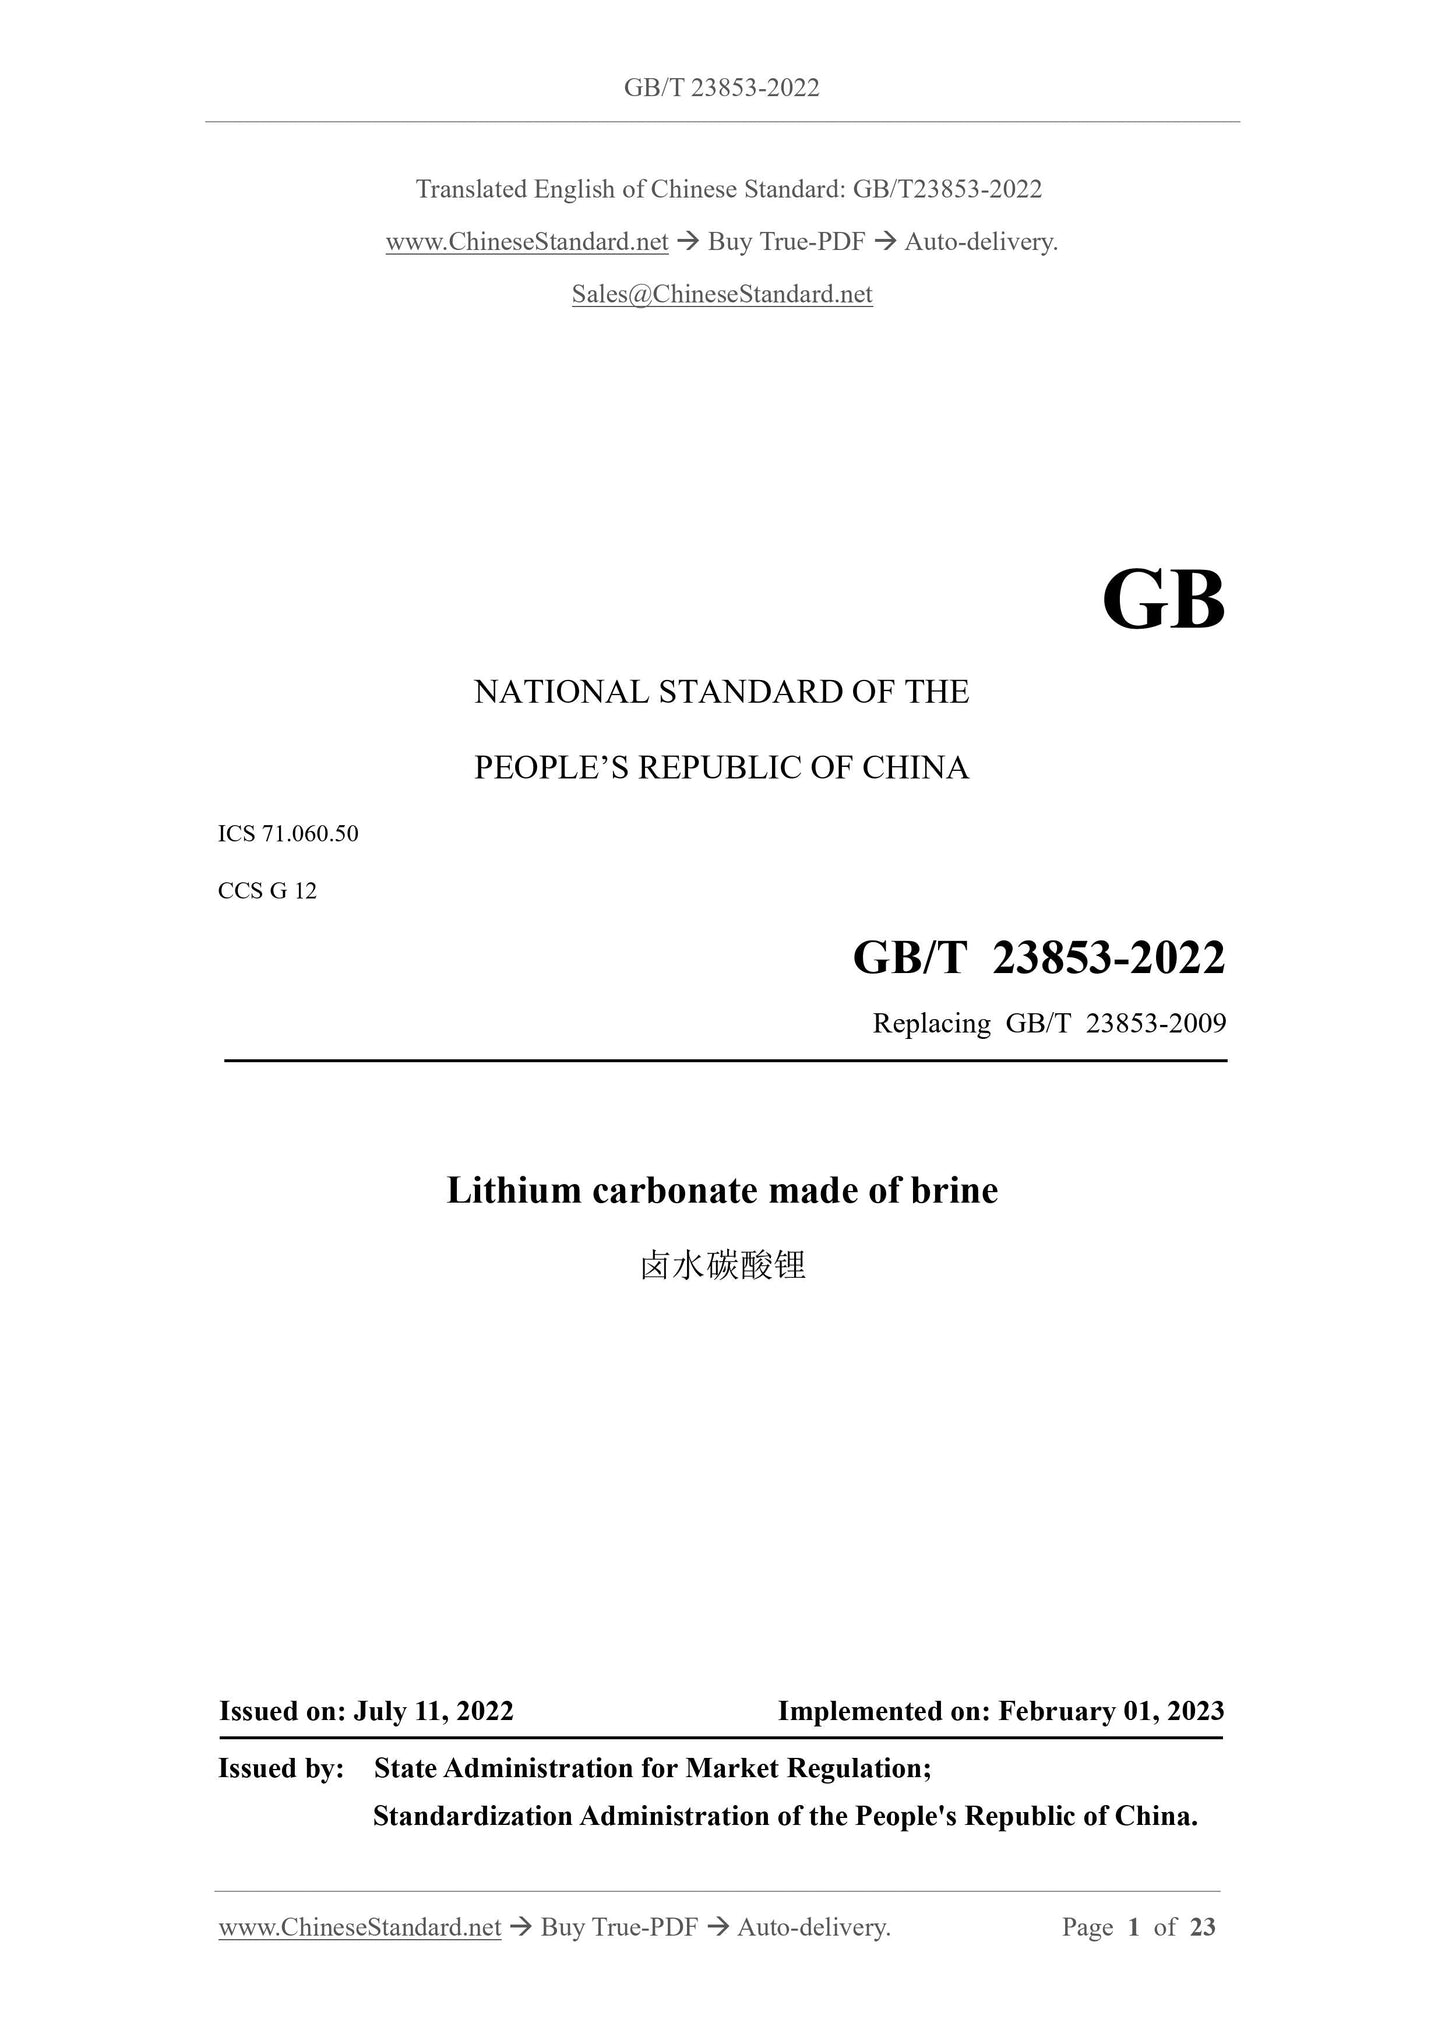 GB/T 23853-2022 Page 1